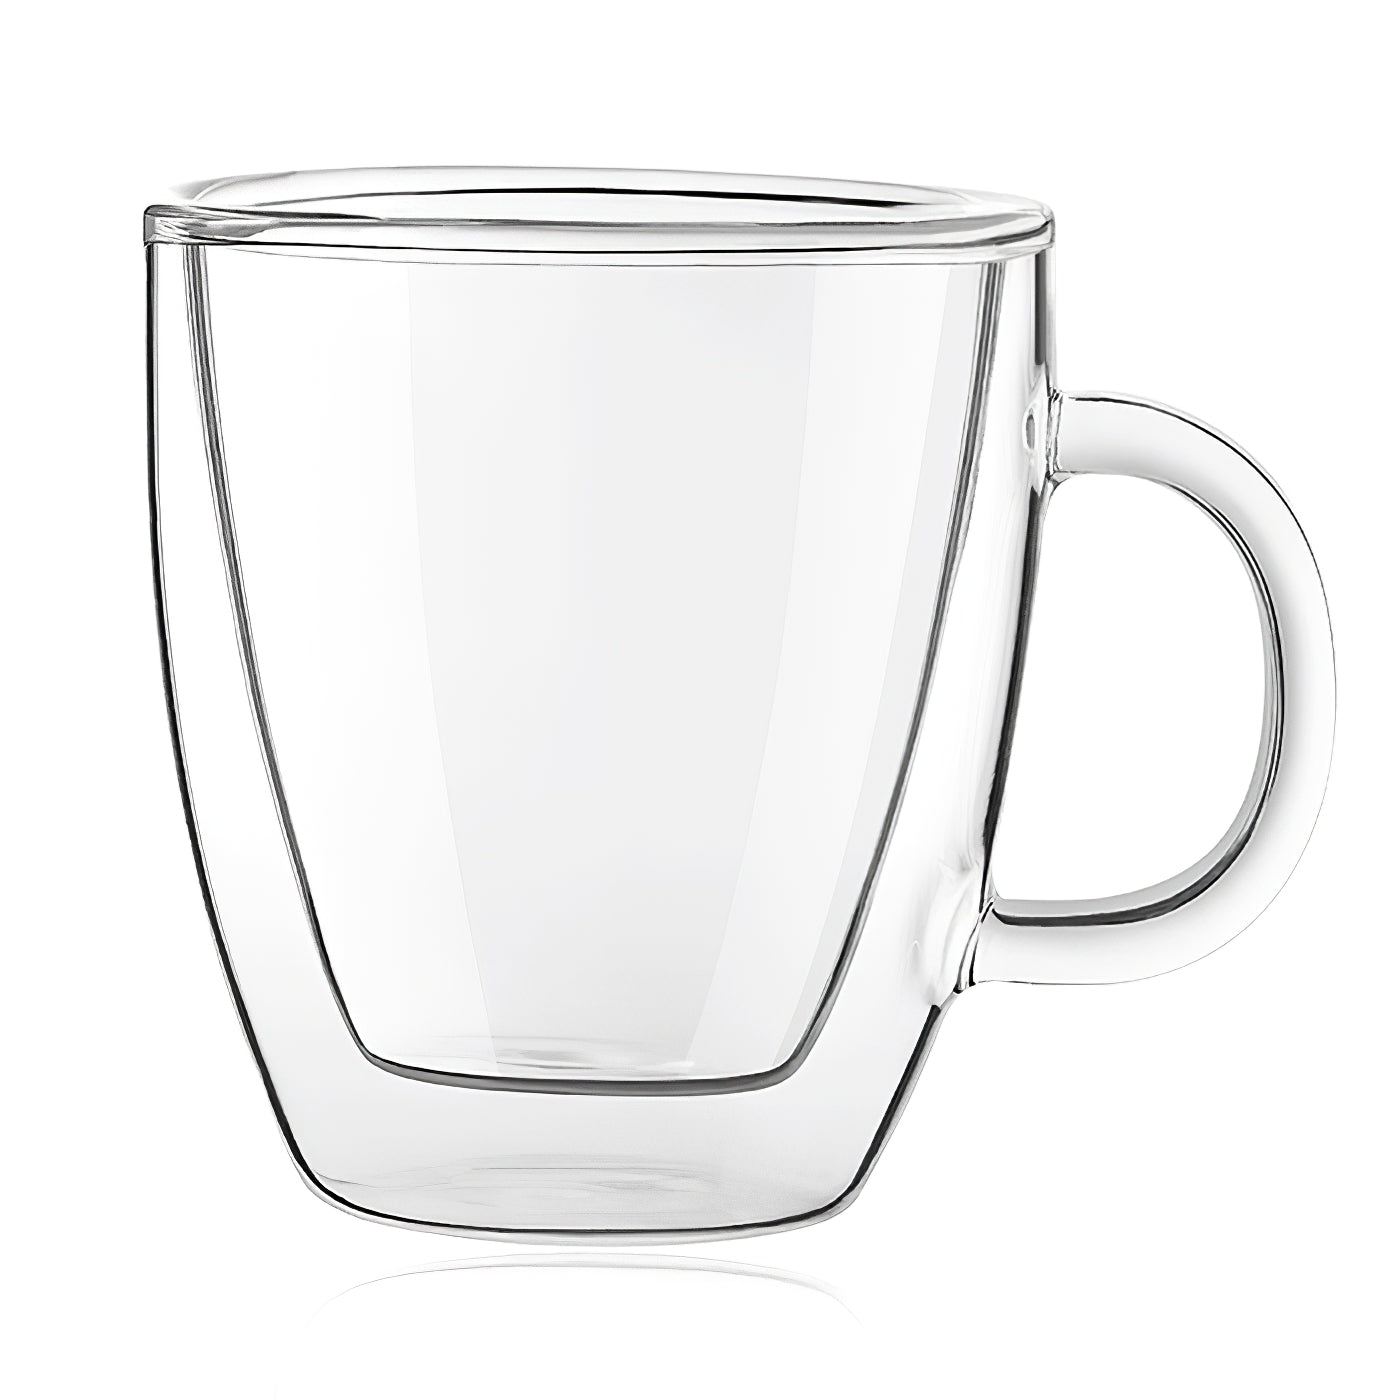 Glass Espresso Cups - Double Wall Insulated Coffee